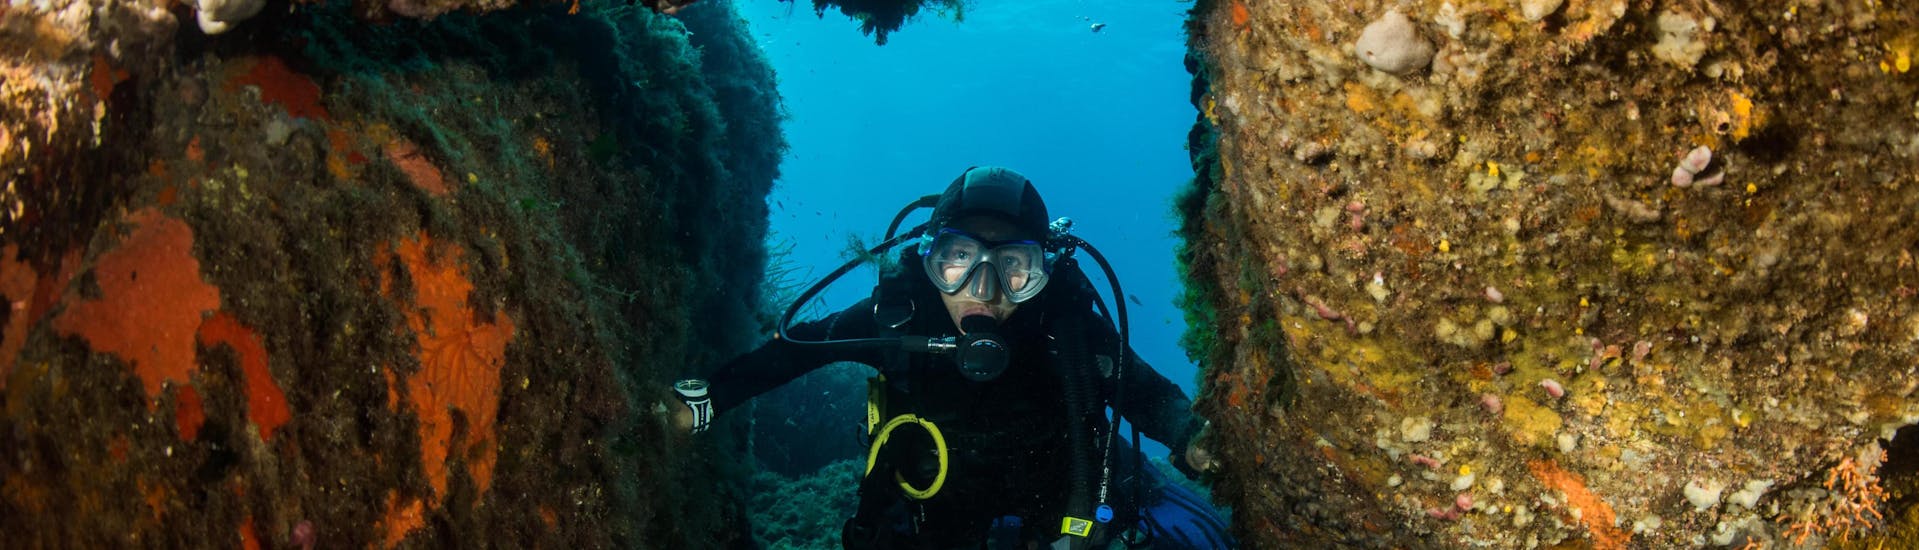 A diver is enjoying the seabed in Corsica during a diving excursion.